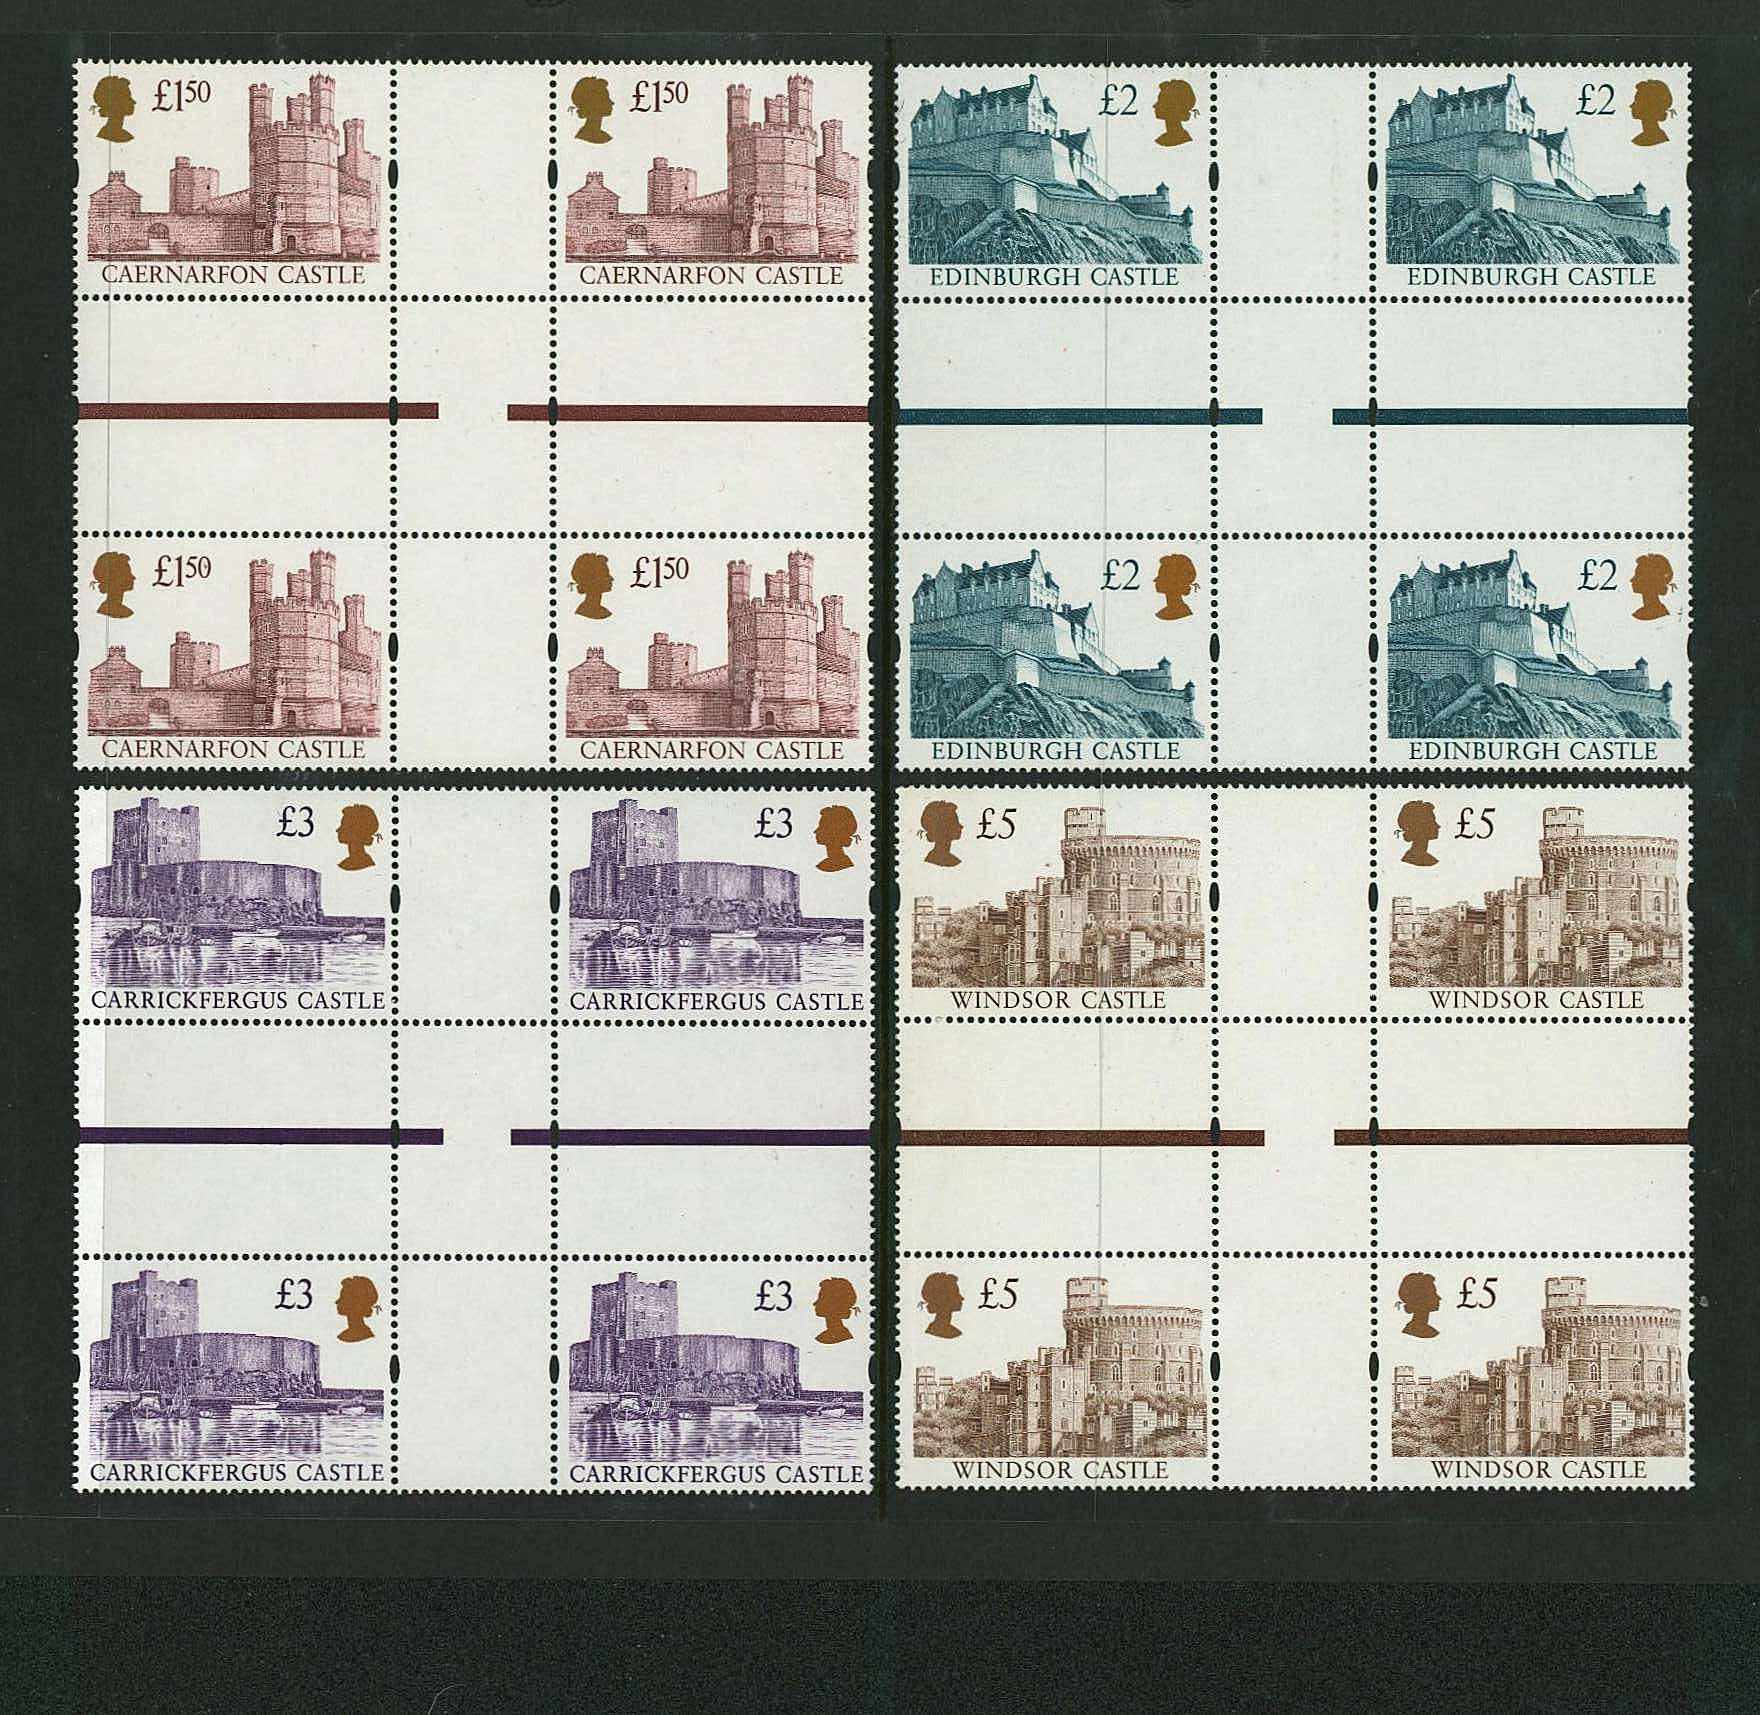 view larger image for SG 1993g-1996g (1997) - The ''Gold Head'' Castles set of four<br/>
Printed by Enschedé<br/>
in unfolded ''Cross Gutter Blocks''<br/>
superb unmounted mint.<br/>
A rare set to find!